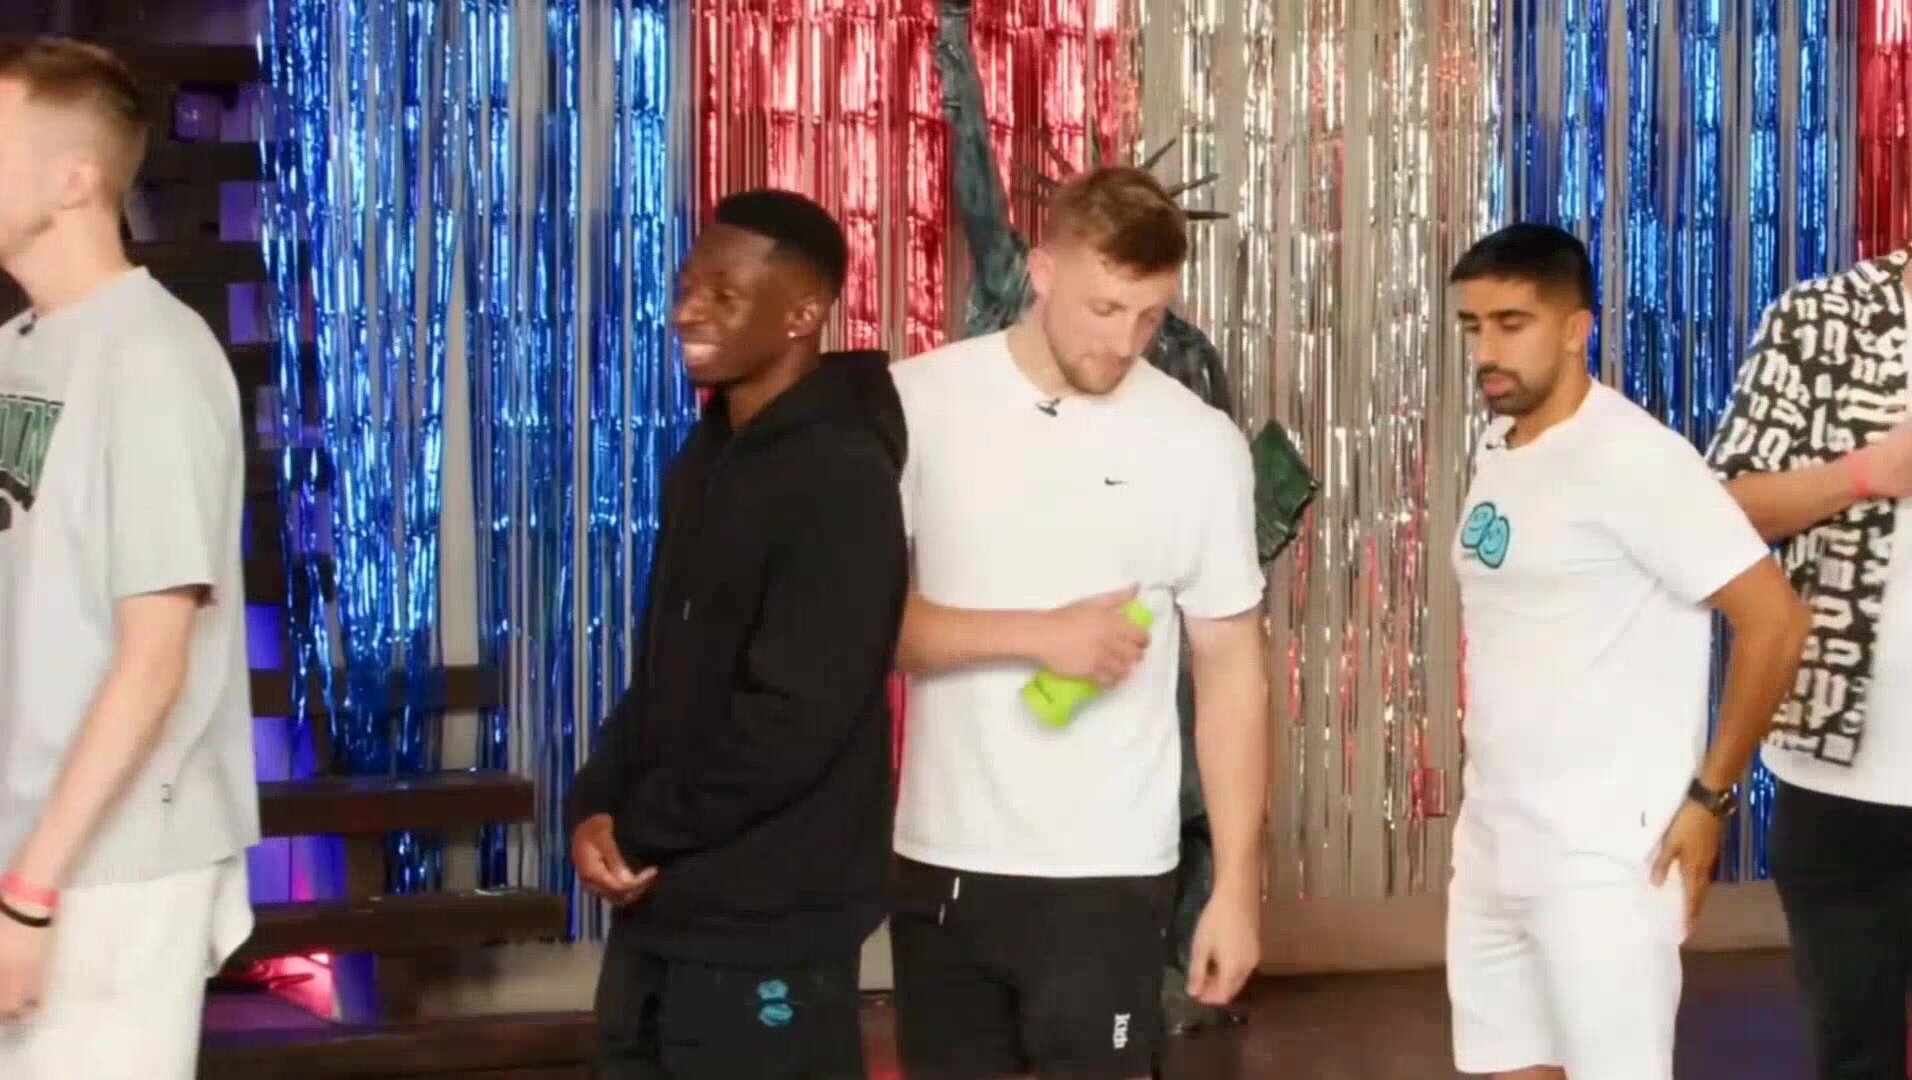 KSI gets her to flash her tits in sidemen  video 